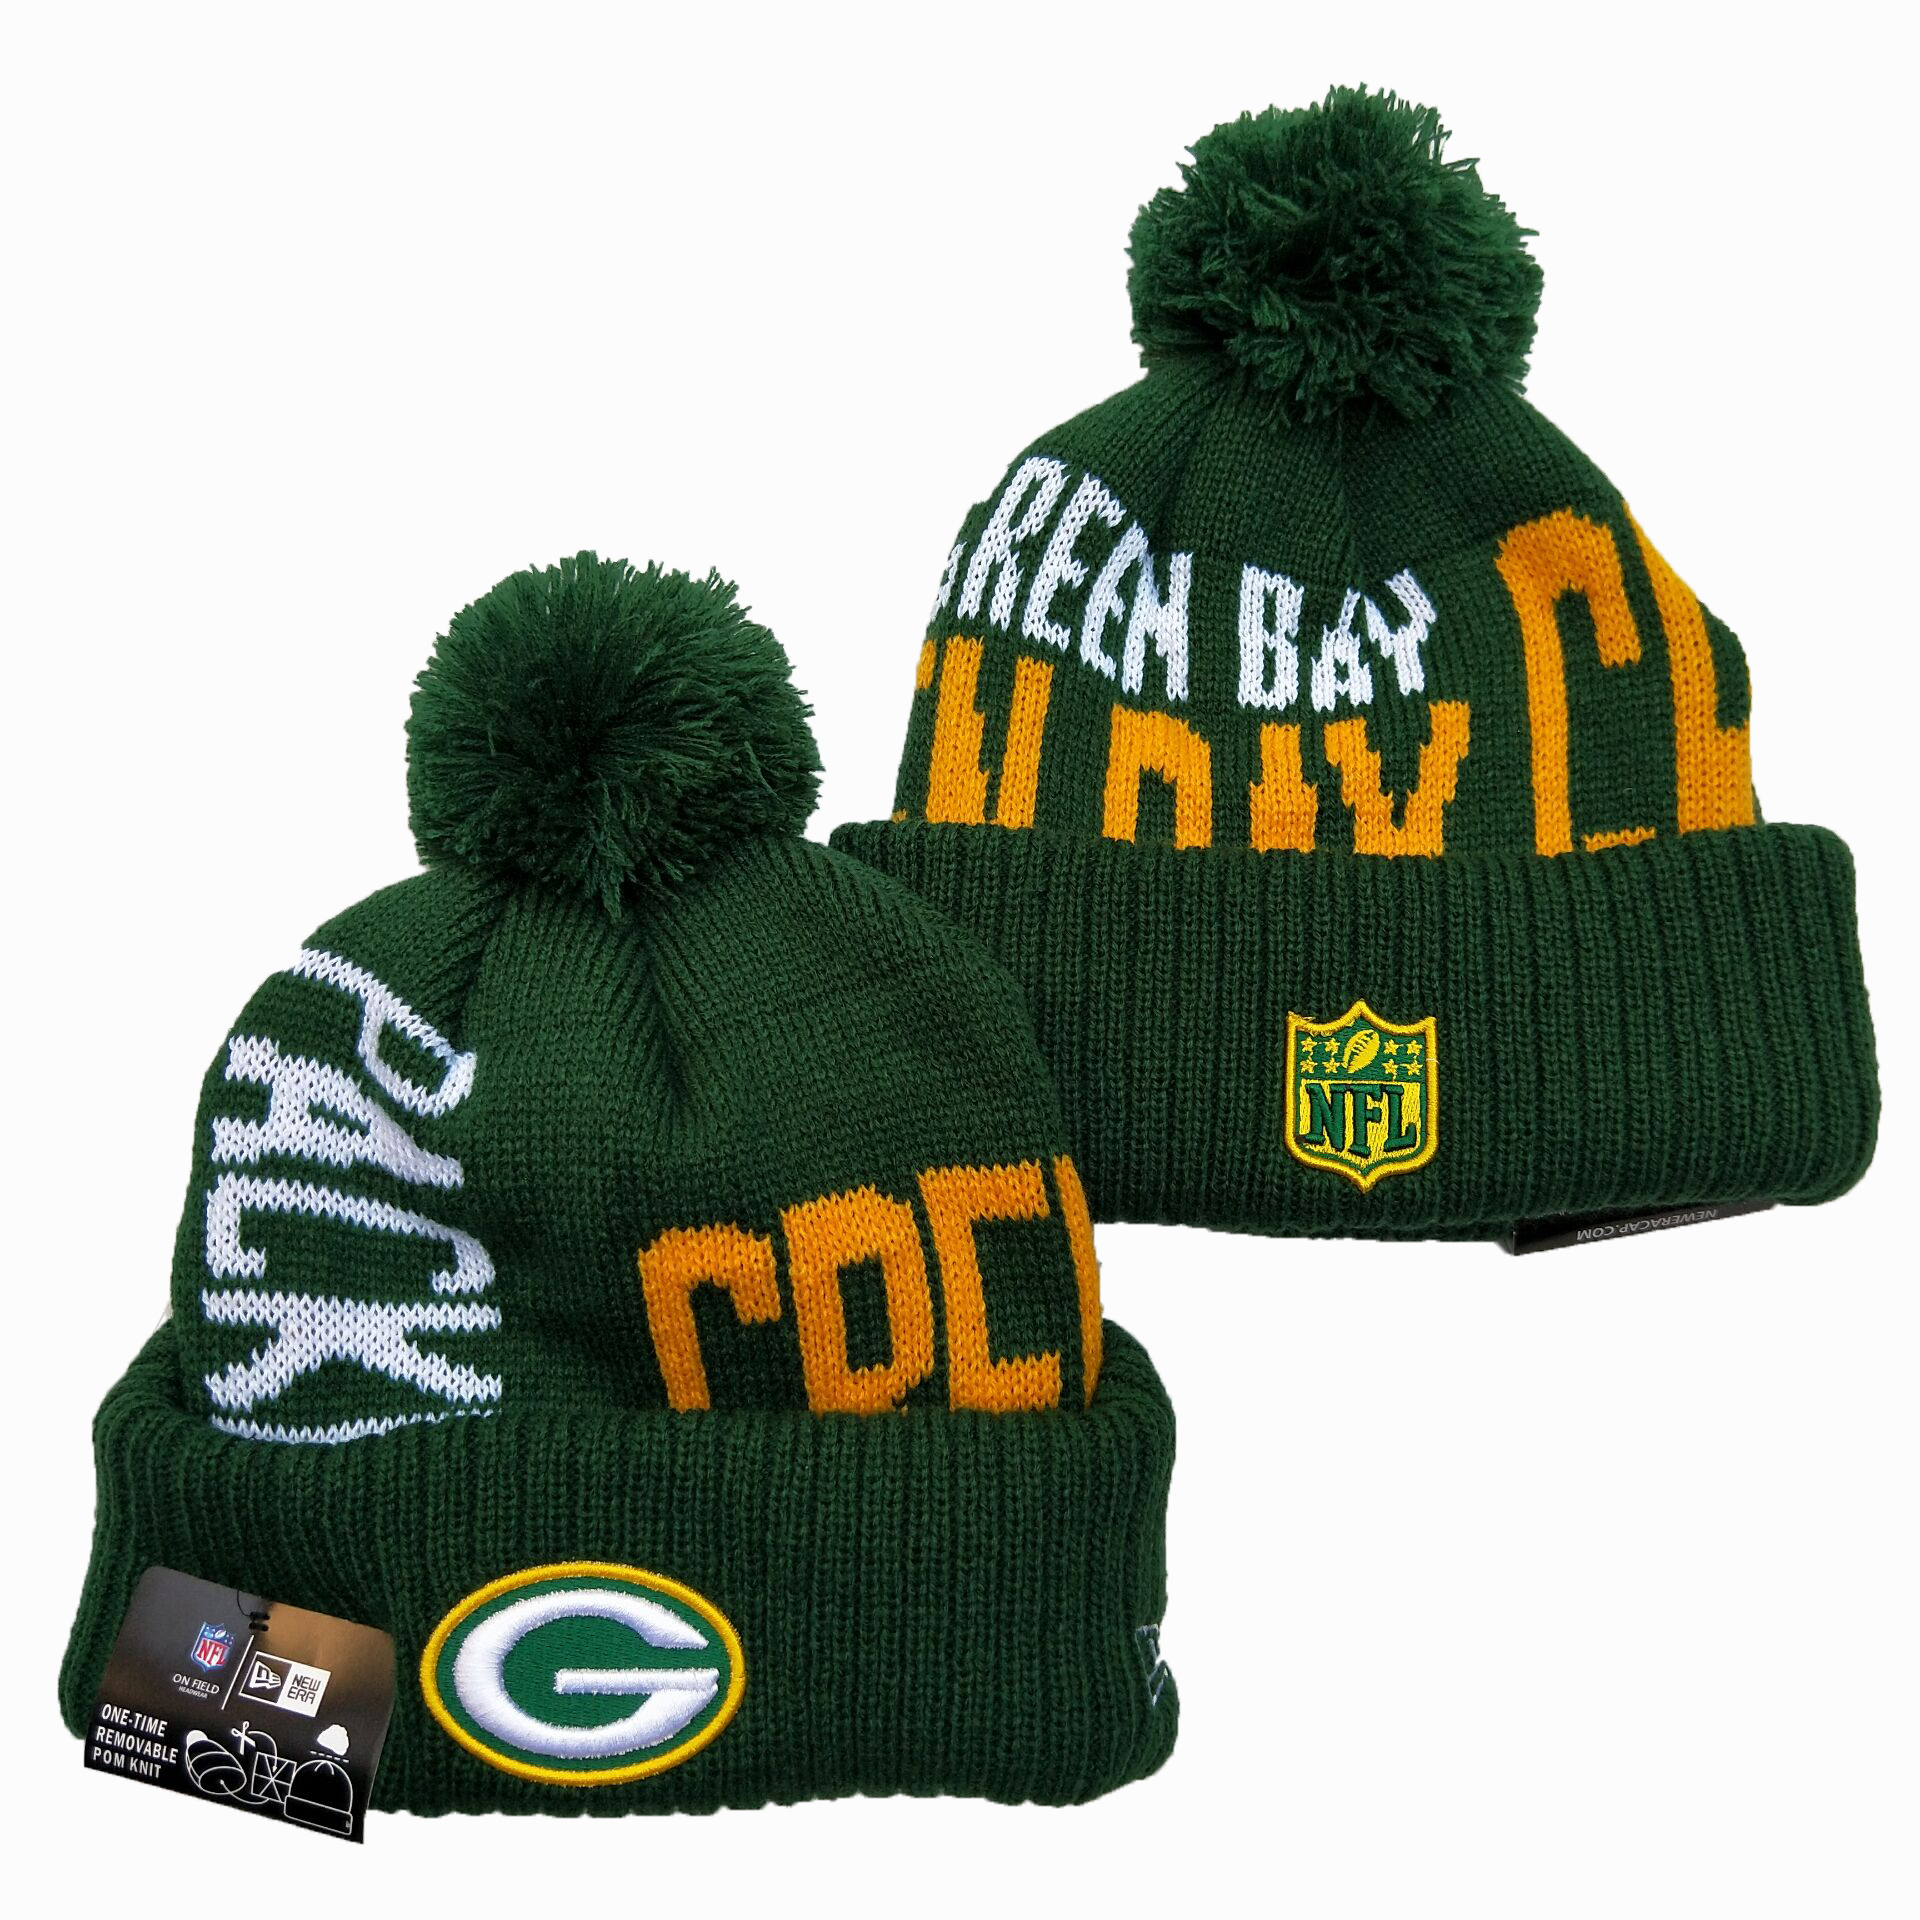 Green Bay Packers knit Hats 072